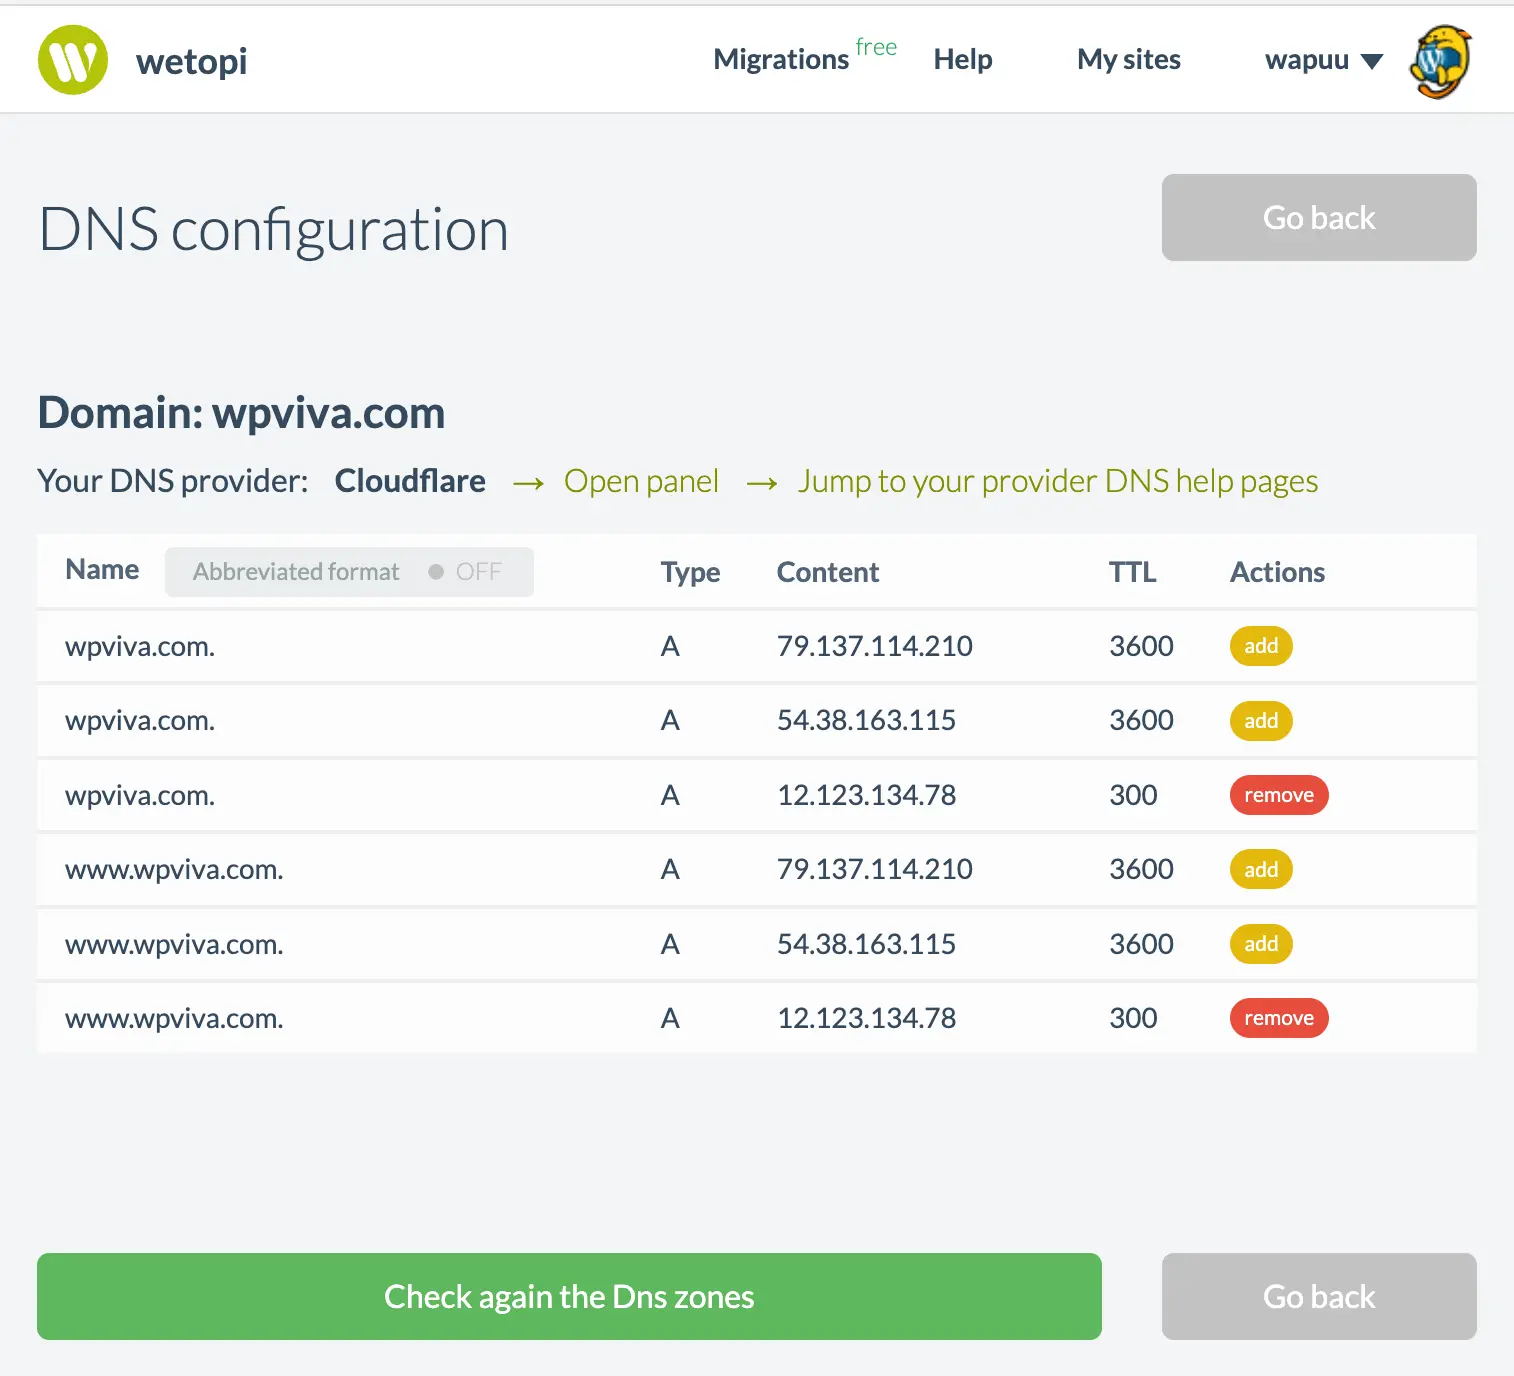 DNS configuration guidelines for your domain